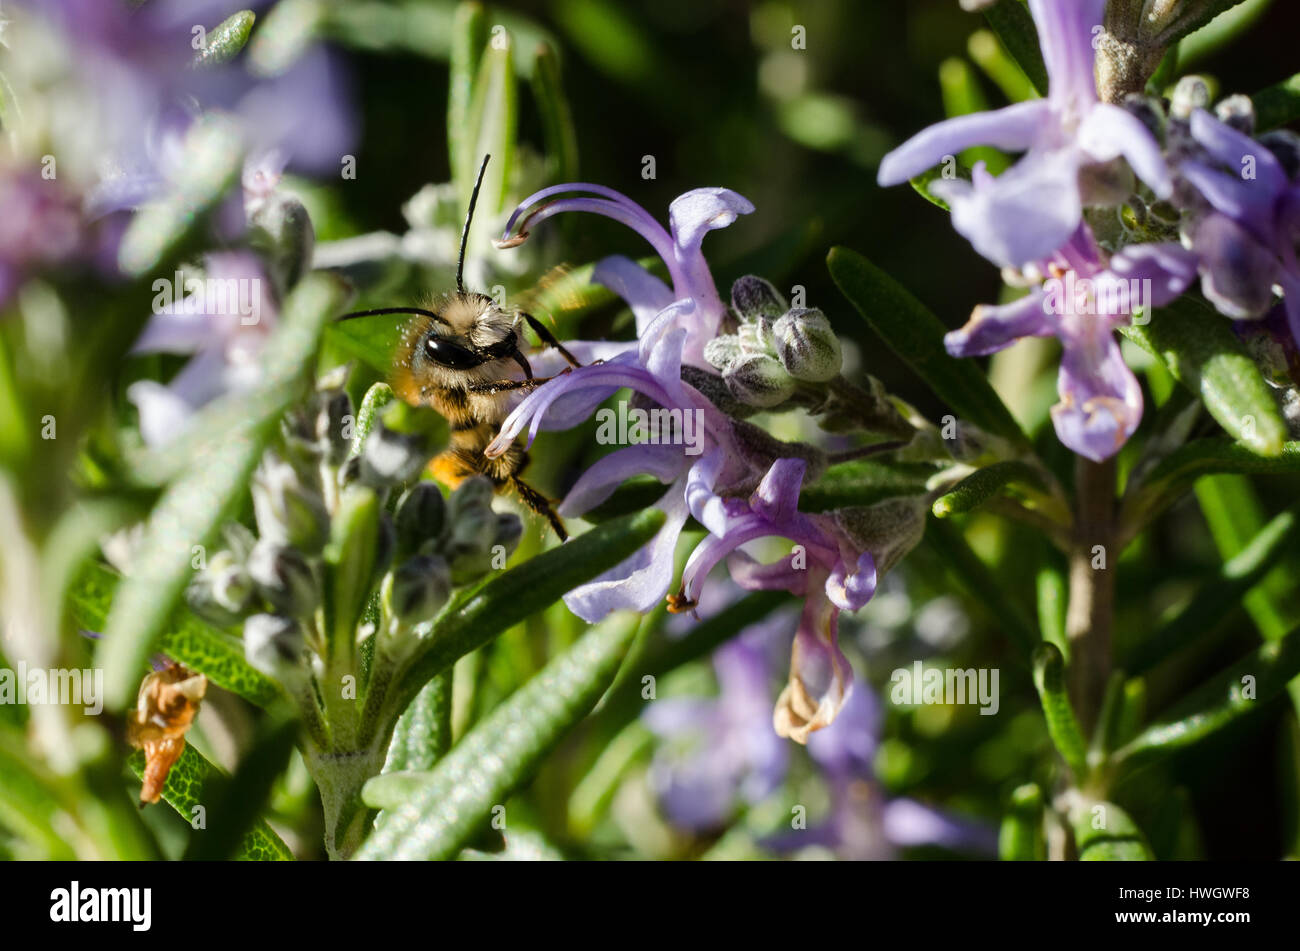 An European honey bee (Apis mellifera) over flowers of rosemary (Rosmarinus officinalis) searching for nectar to sip. Stock Photo